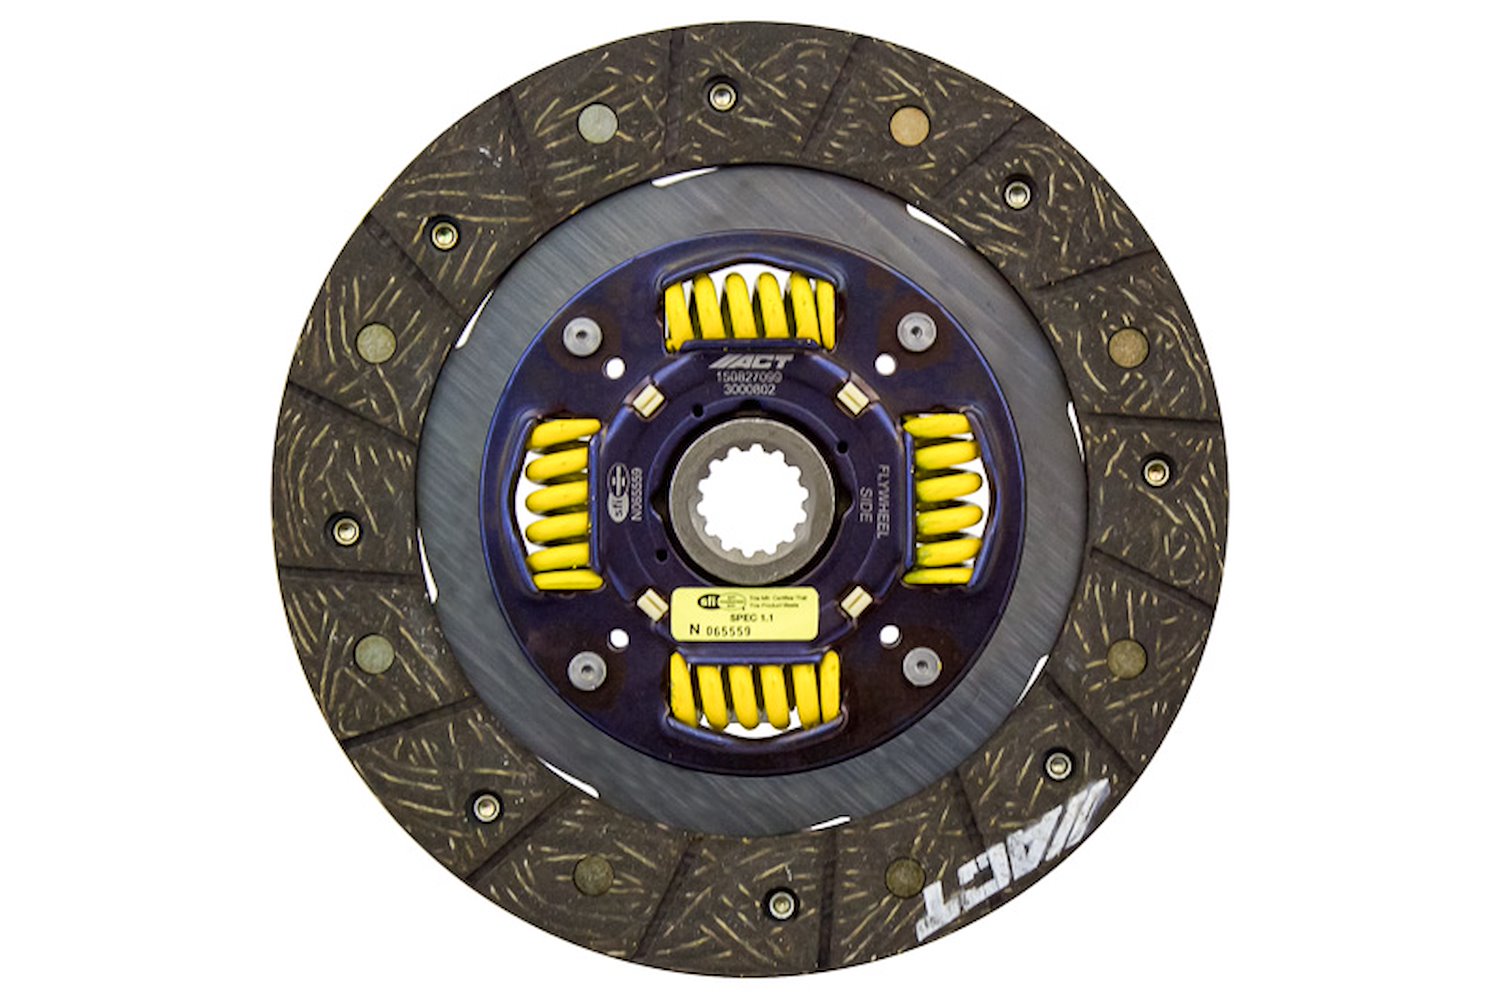 Performance Street Sprung Disc Transmission Clutch Friction Plate Fits Select Mini